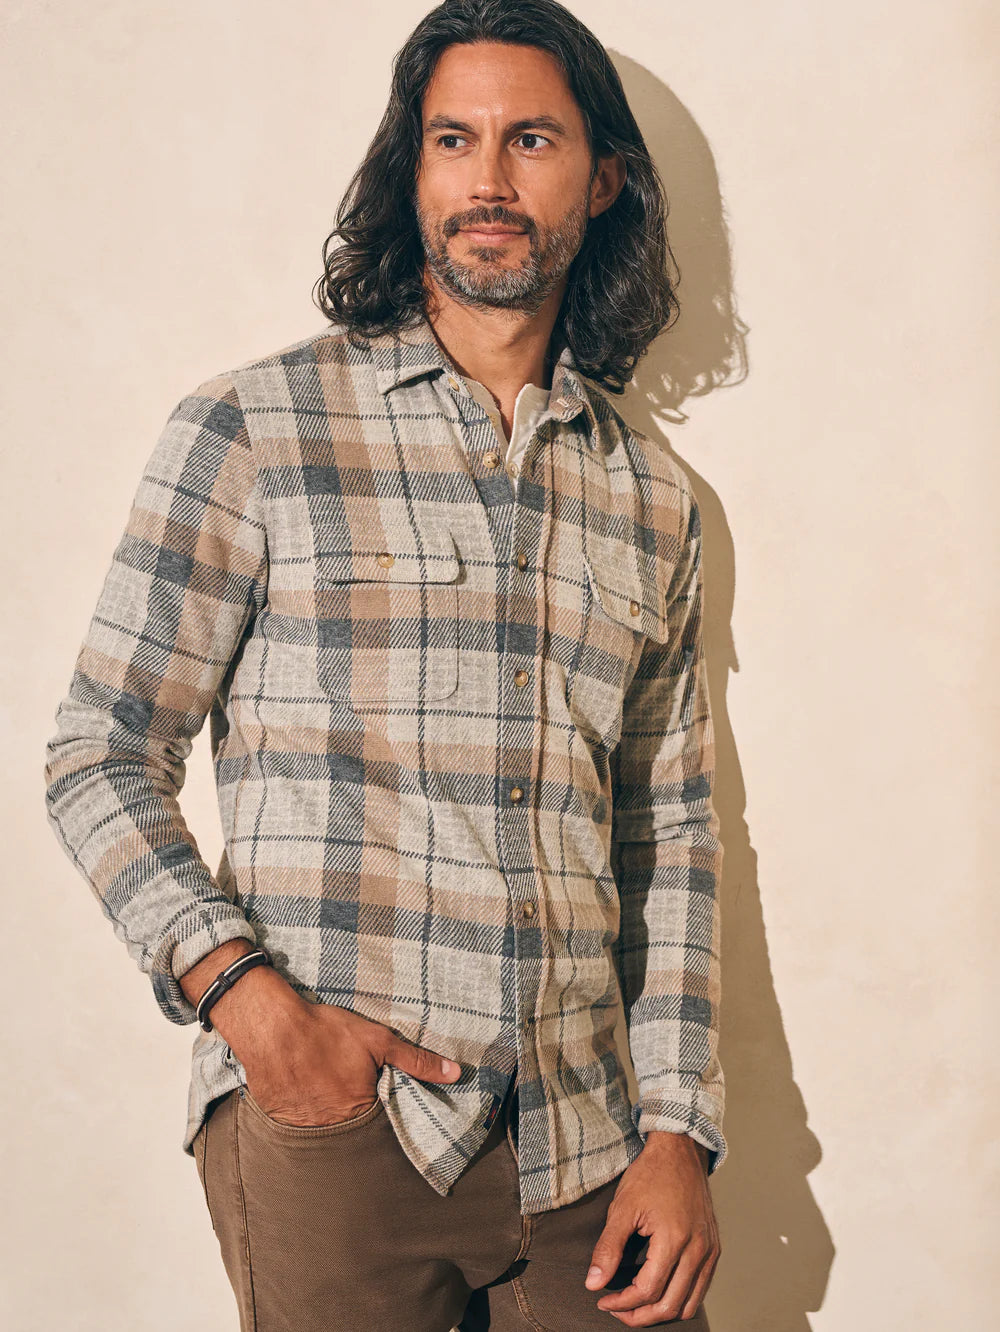 LEGEND SWEATER SHIRT - WESTERN OUTPOST PLAID